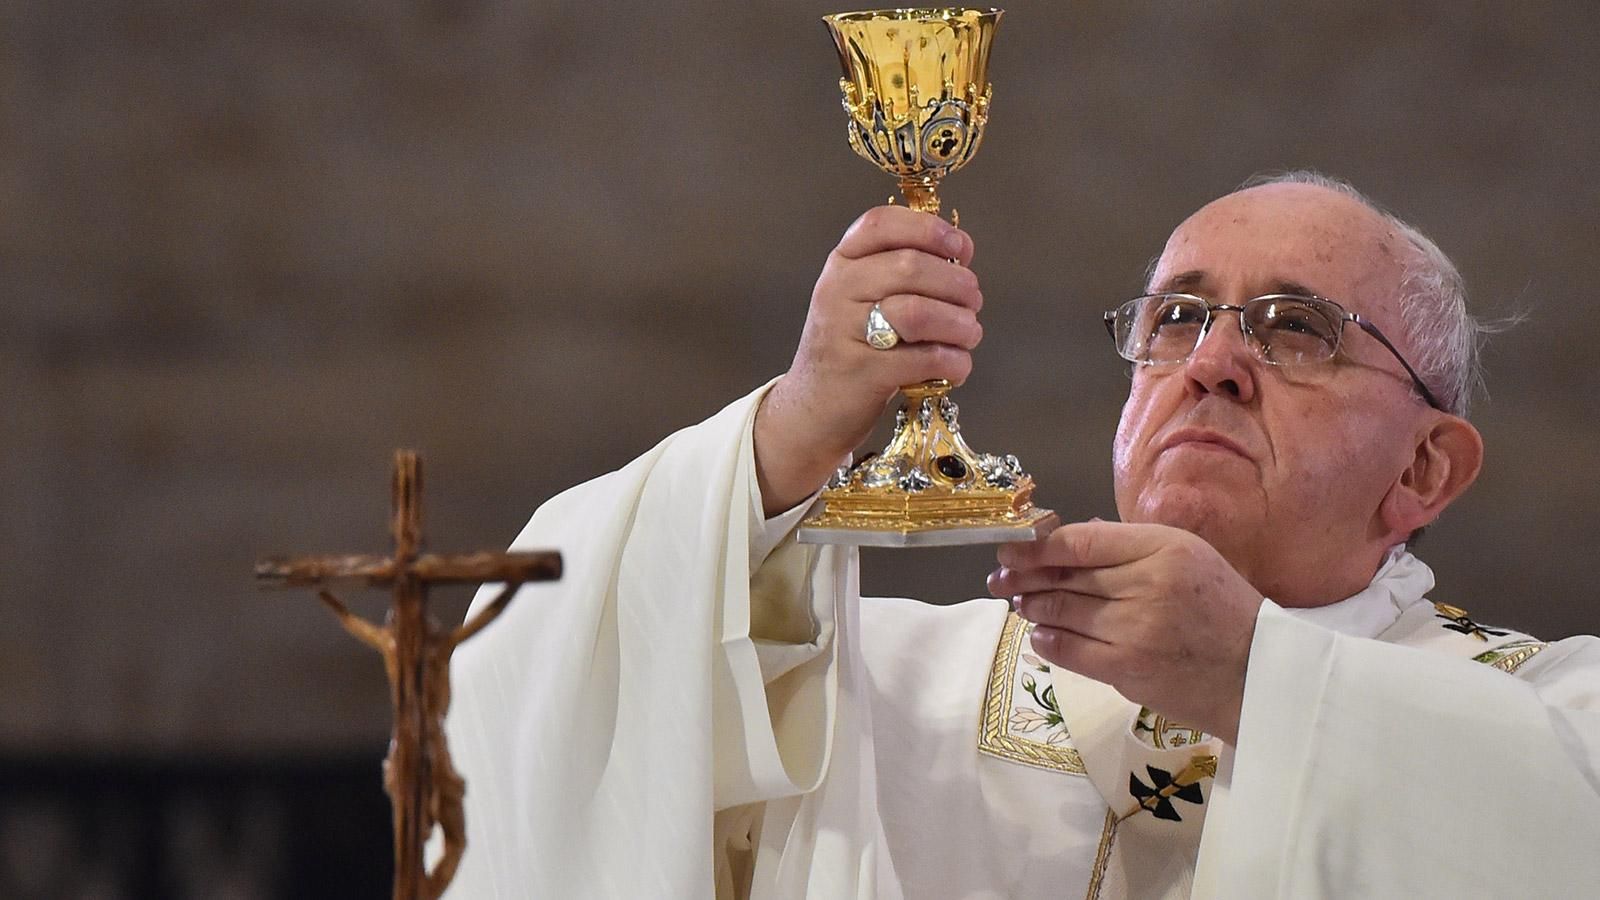 Pope Francis checking if the wine is gay before blessing it